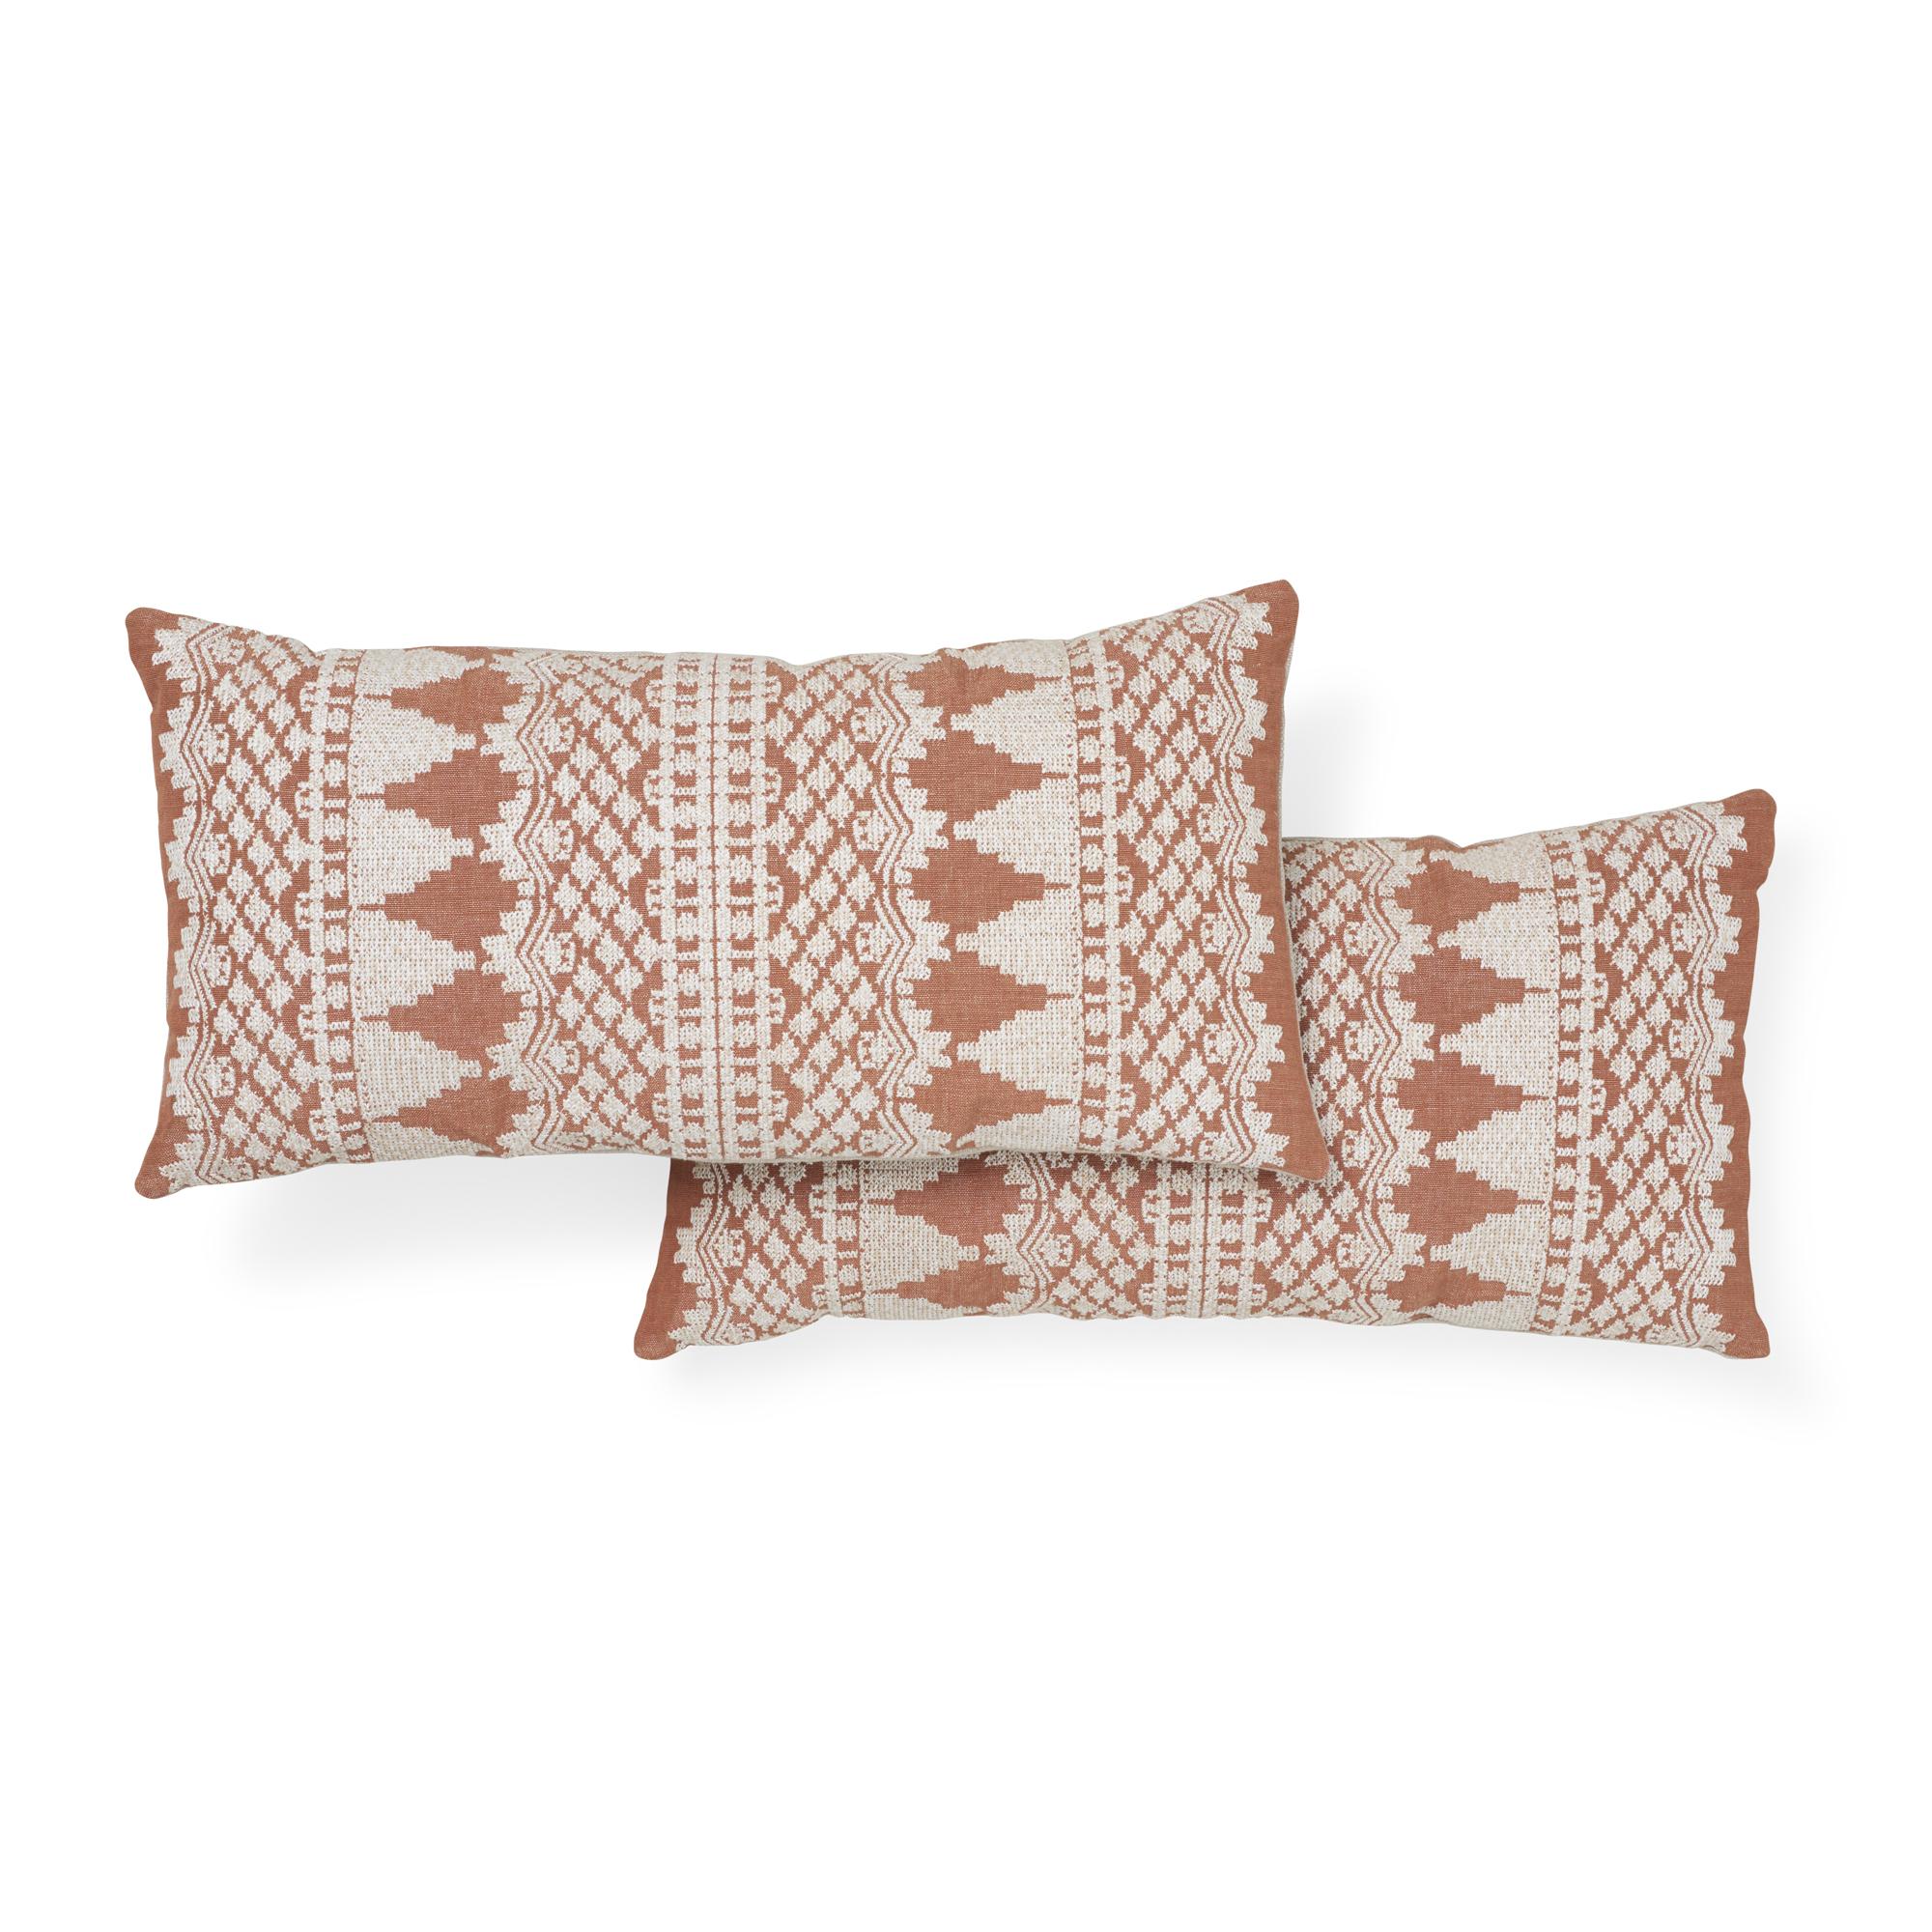 Indian Schumacher Wentworth Embroidery Rust Linen Cotton Pillow For Sale